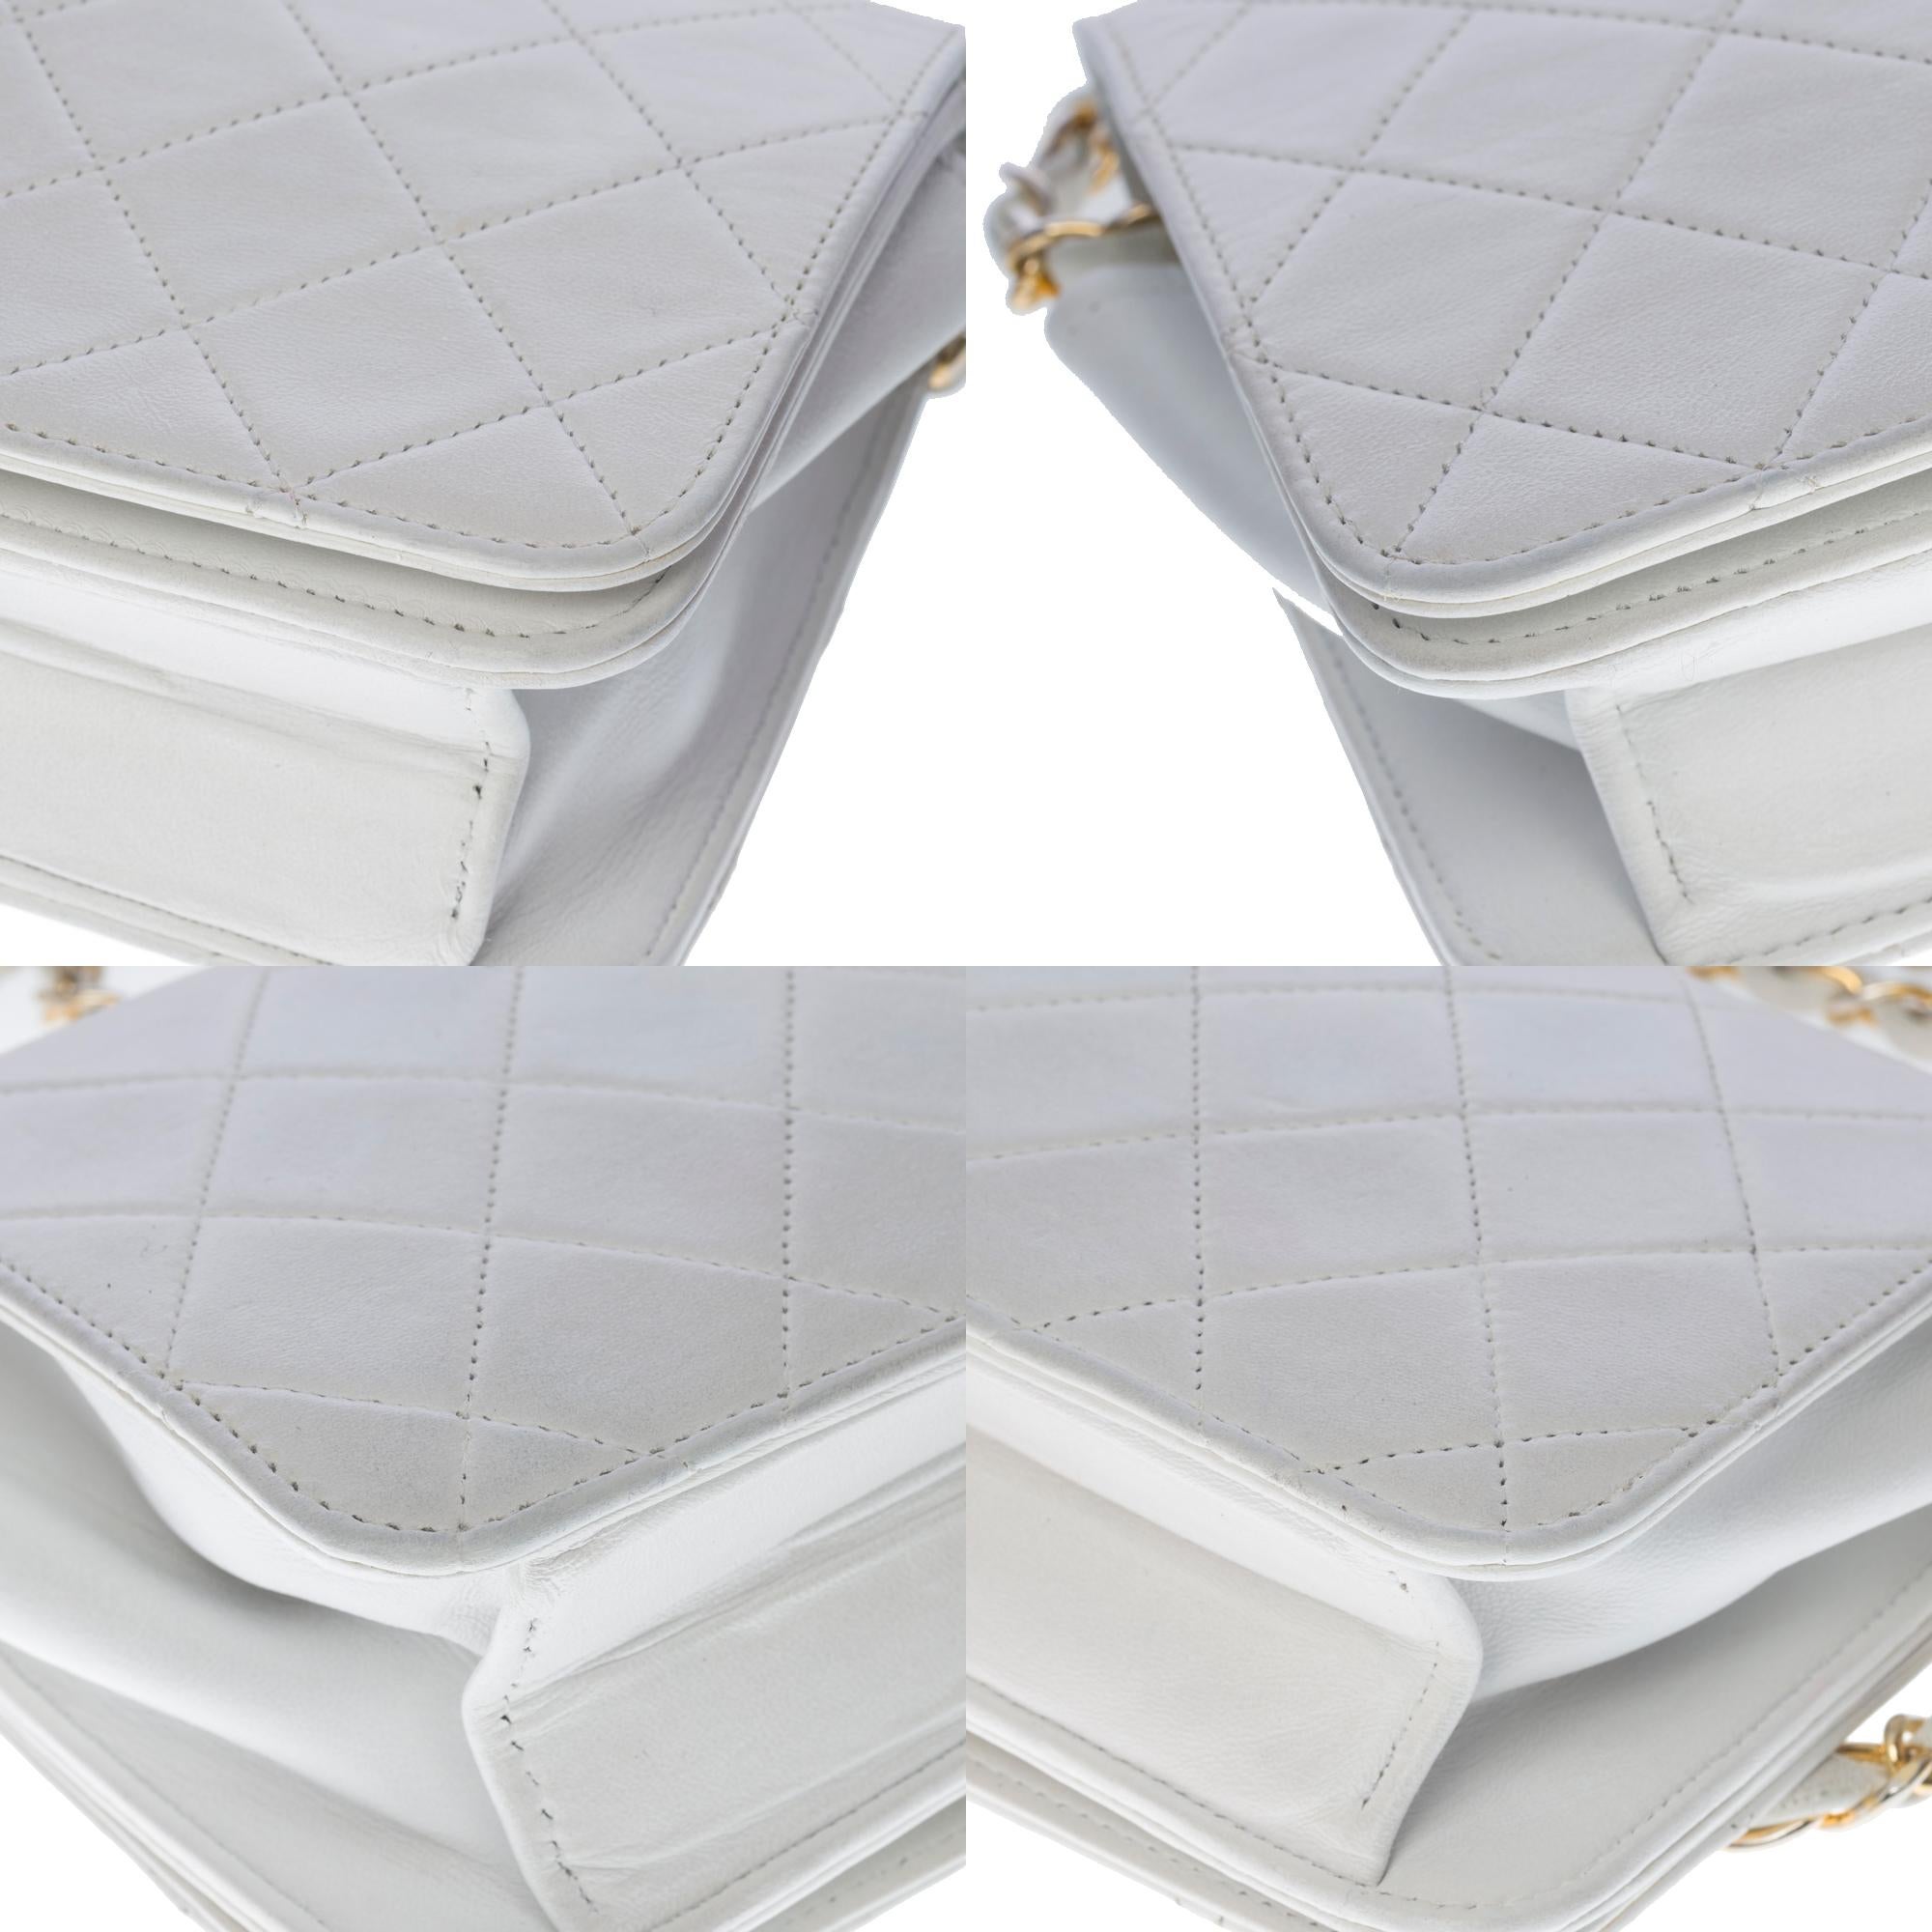 Chanel Full flap Mini shoulder bag in white quilted lambskin, GHW 4